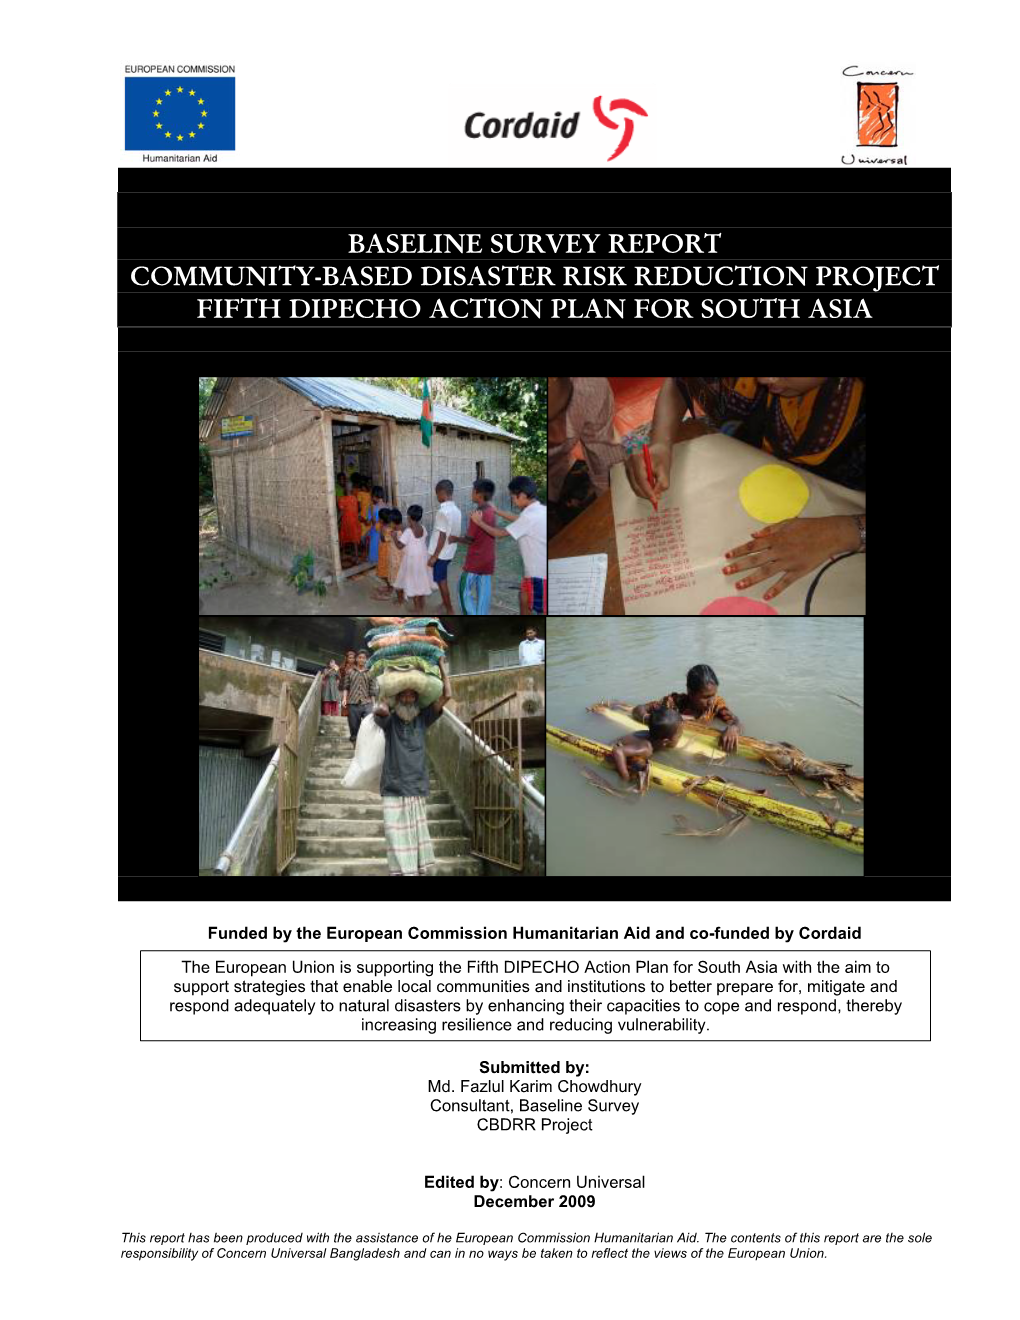 Baseline Survey Report Community-Based Disaster Risk Reduction Project Fifth Dipecho Action Plan for South Asia